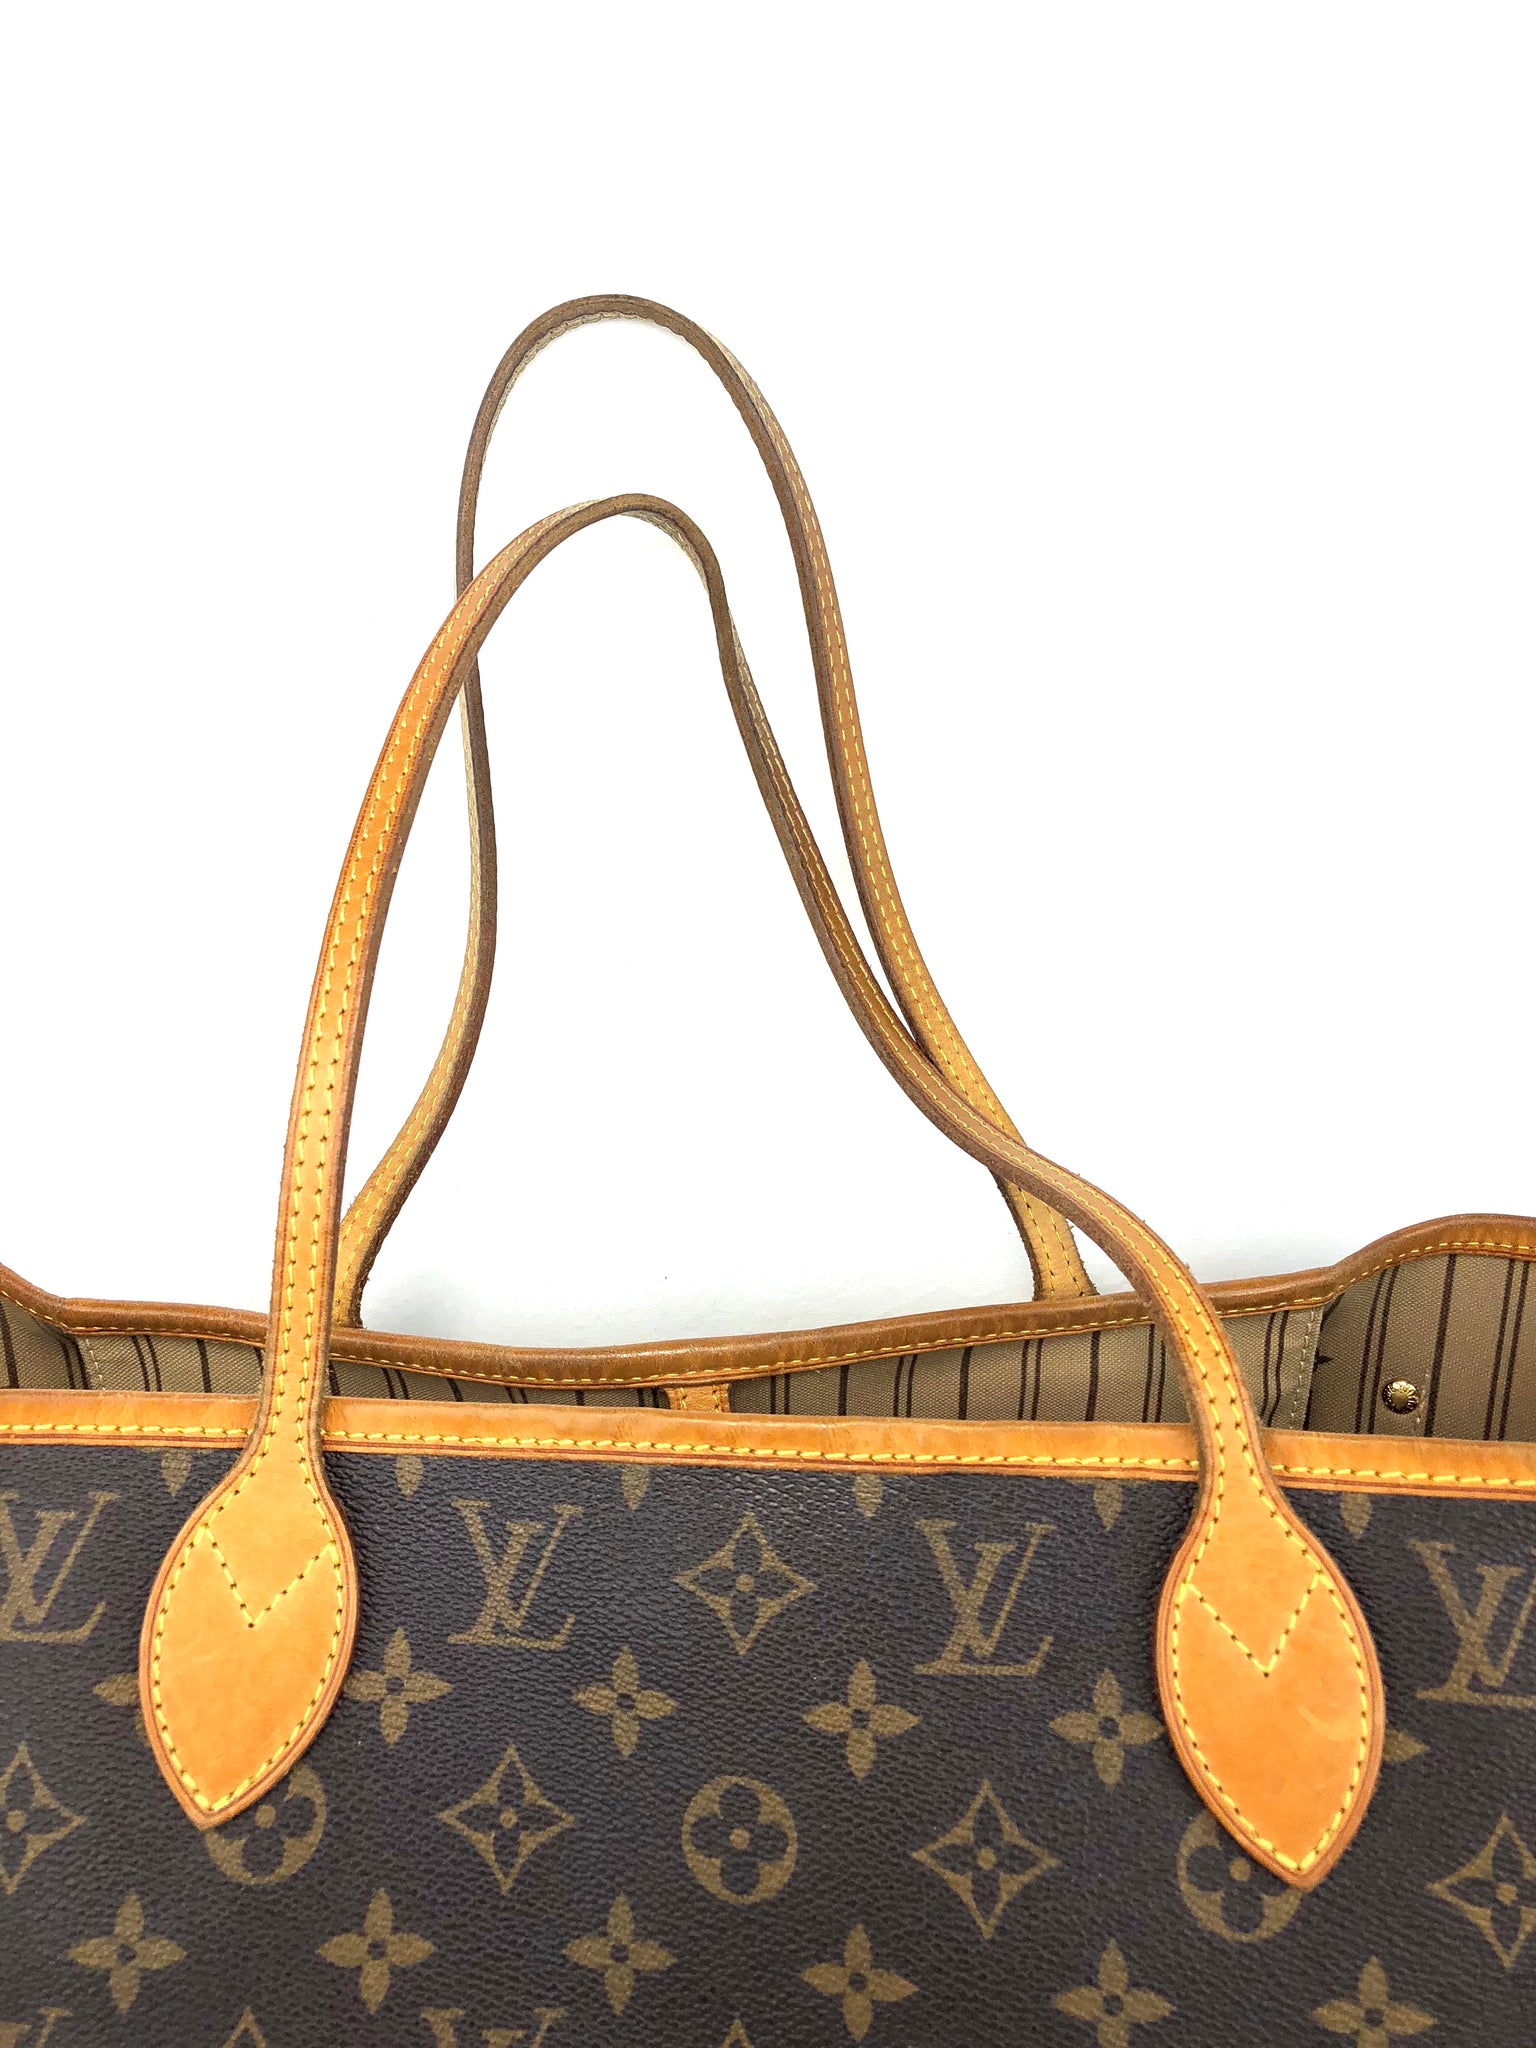 Neverfull Owners: Do you like it Cinched or Wide open?